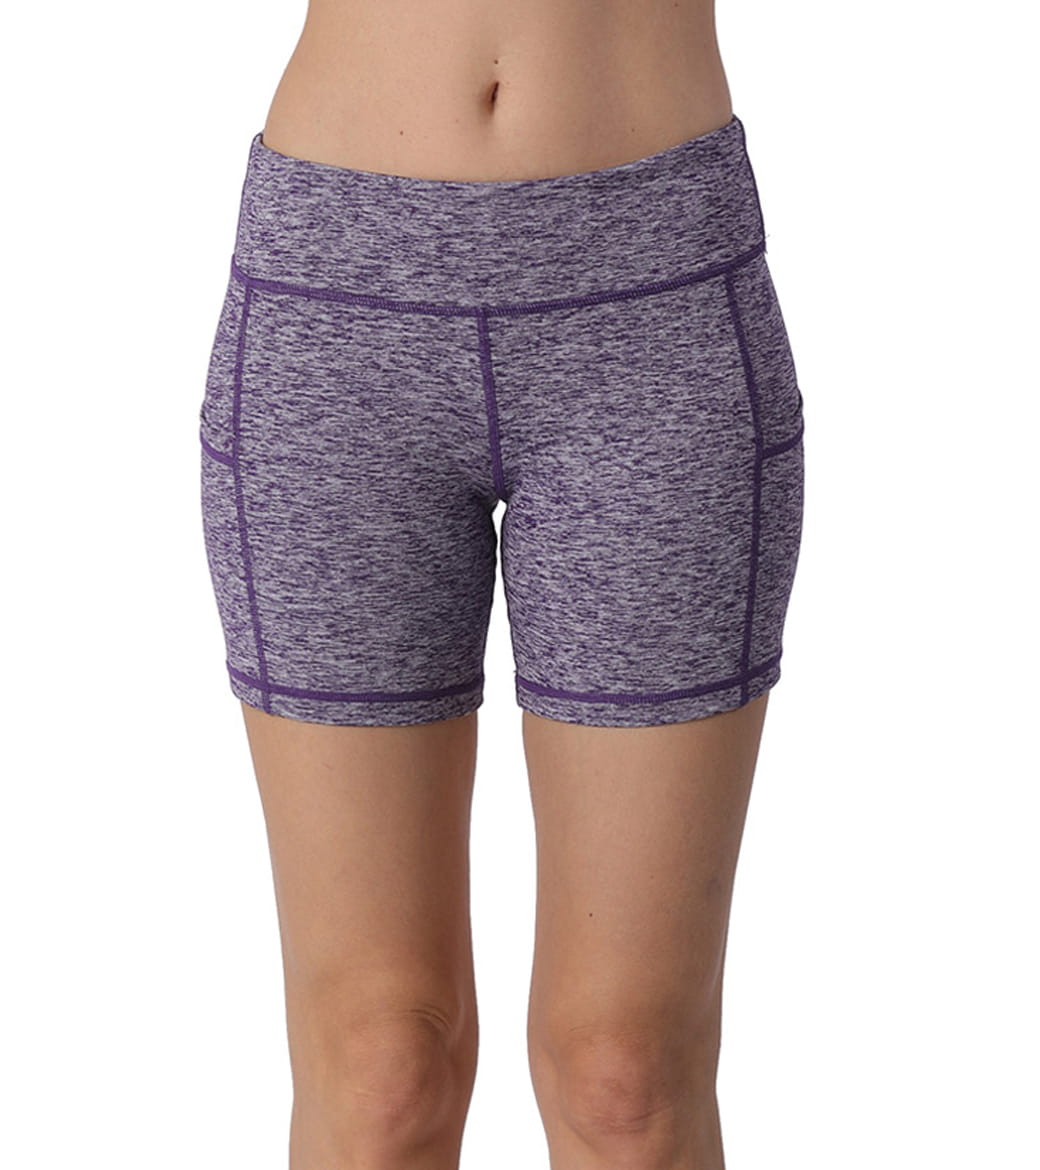 LOVESOFT Women's Workout Running Yoga Shorts with Side Pocketed